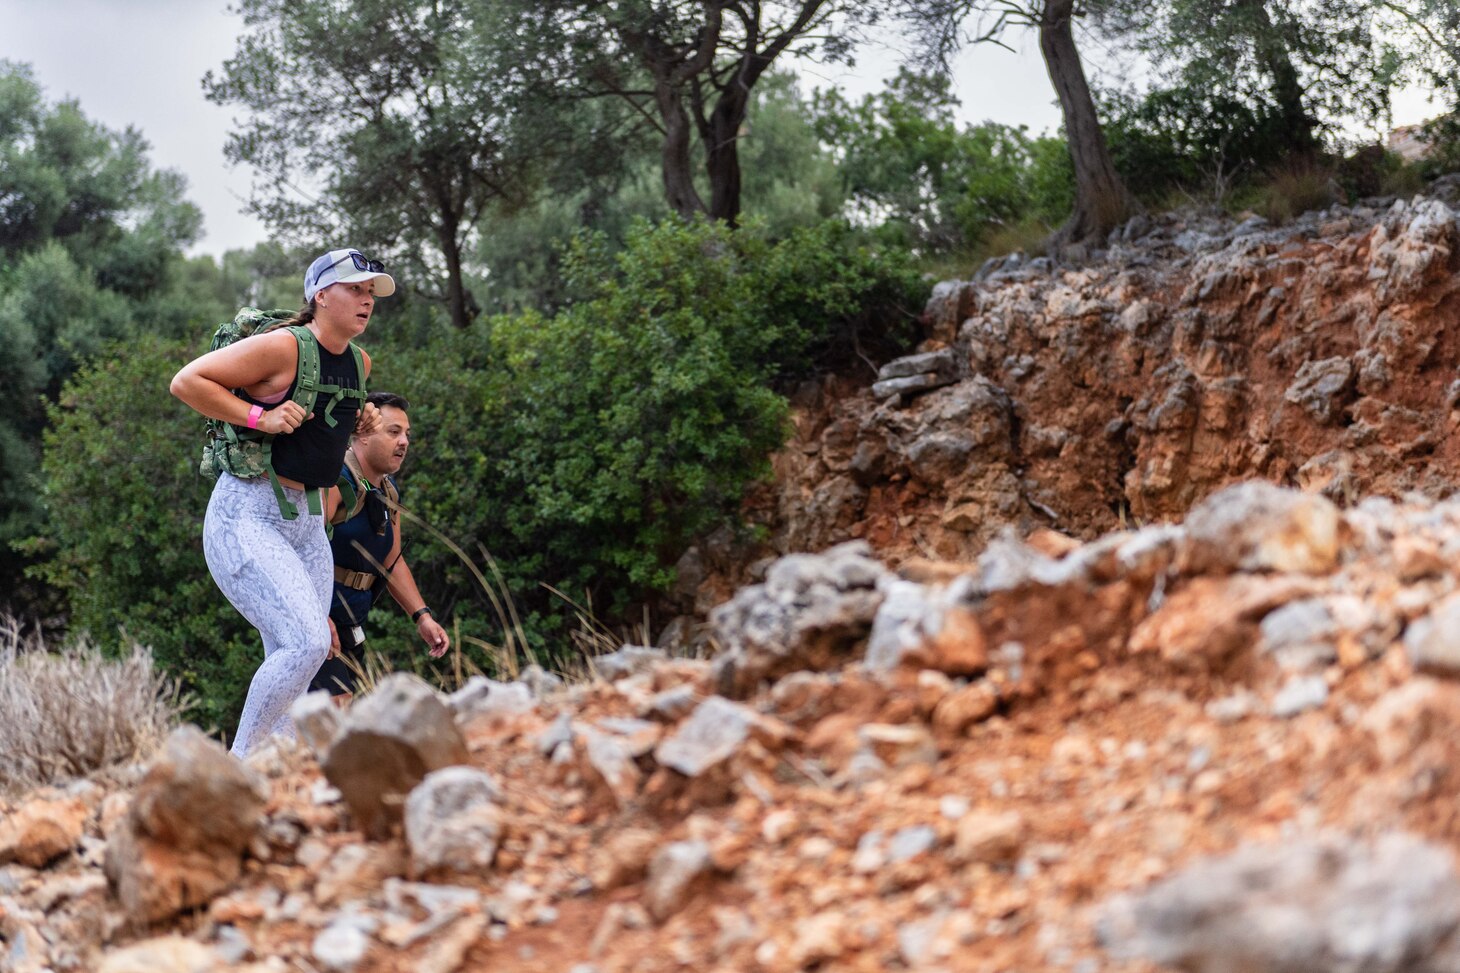 Competitors affiliated with Navy Support Activity Souda Bay, NATO and Hellenic armed forces take part in a 10.4-kilometer hike as part of the 20th Eco-Challenge event hosted by NSA Souda Bay and organized and executed by the Morale, Welfare and Recreation team on Sept. 9, 2023.